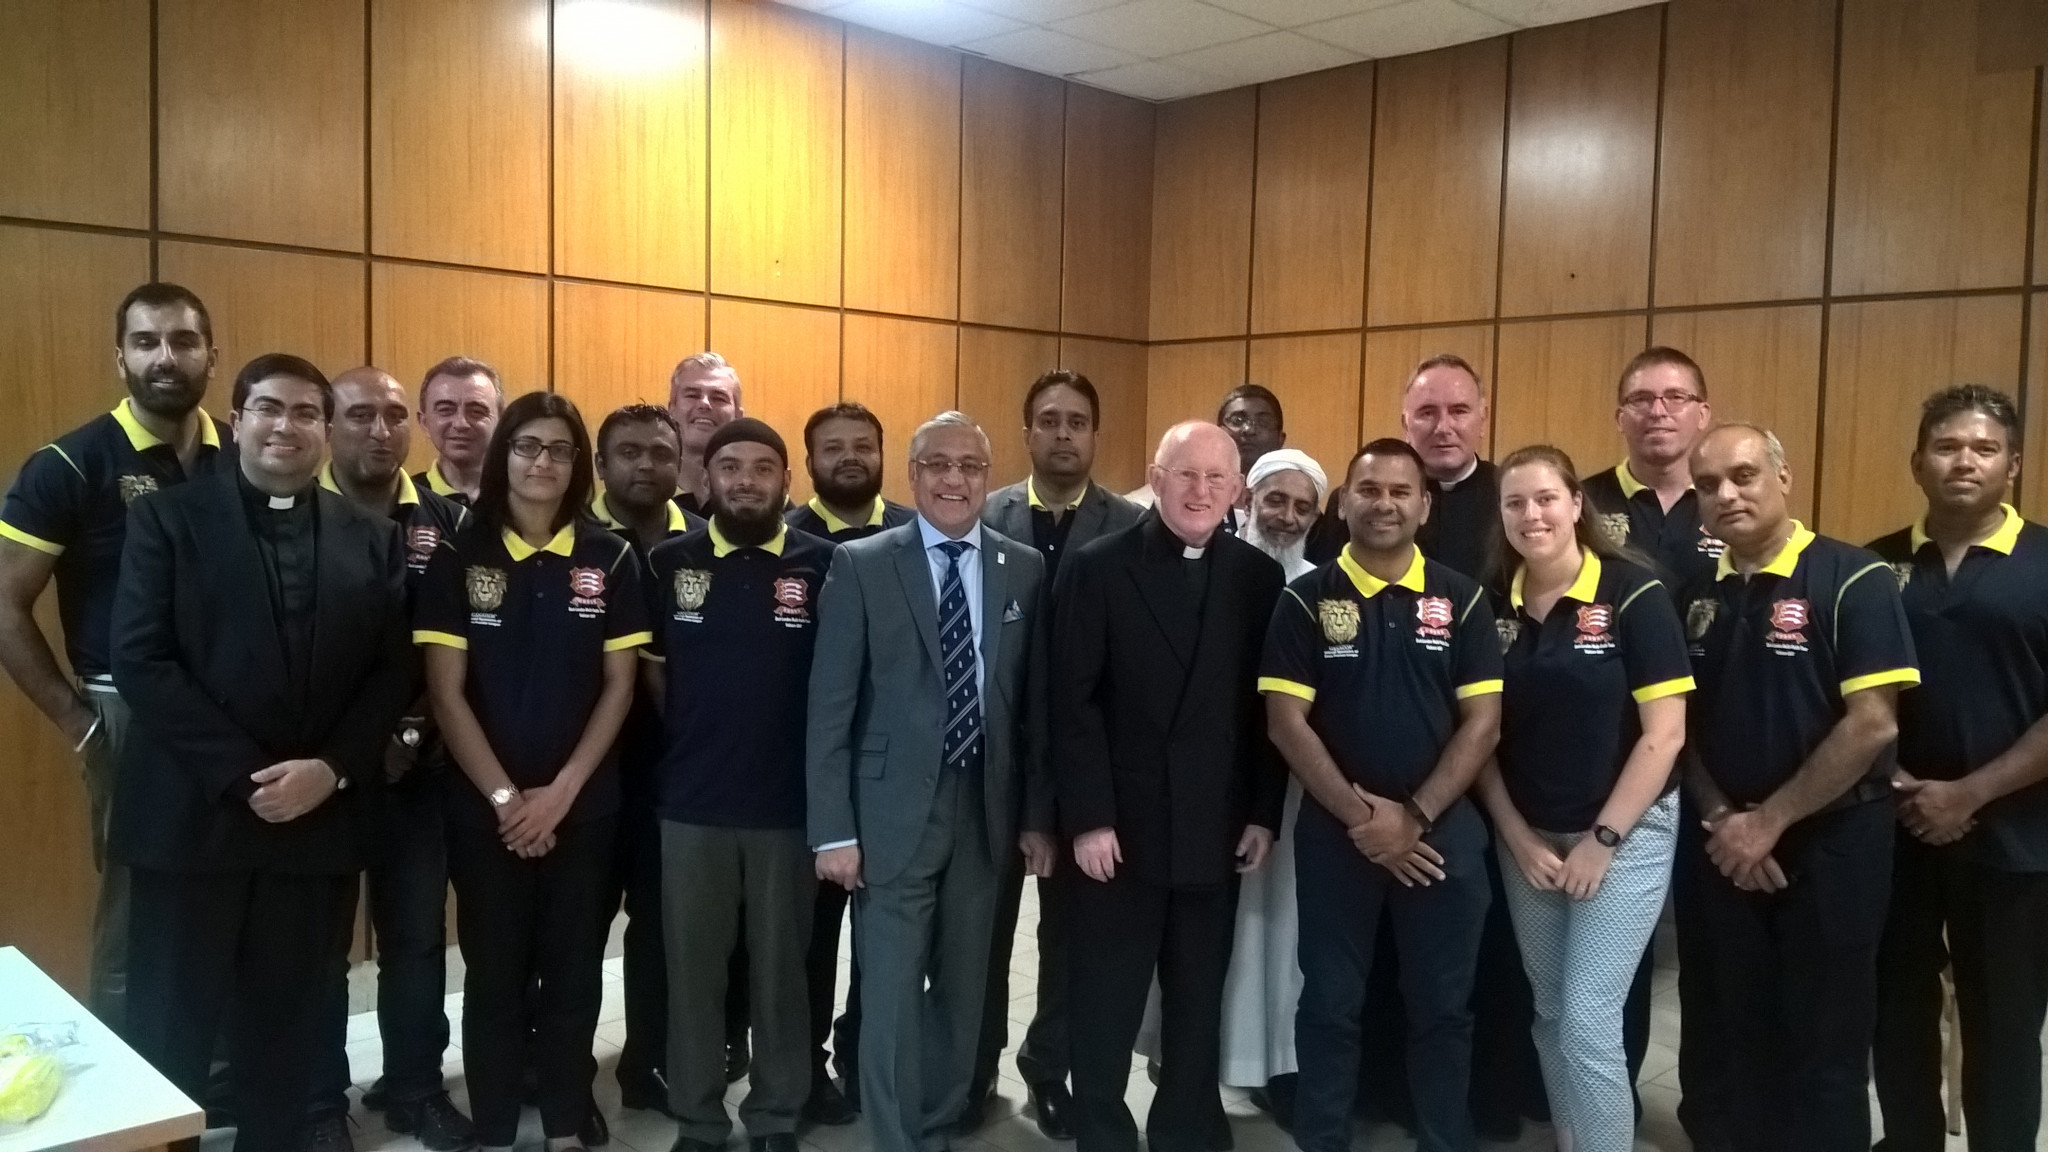 Members and supporters of St Peter's XI, a cricket team from the Vatican and their visitors from the Inter-Faith XI, a British team made up of Christians, Hindus, Muslims and Sikhs ©St Peter's XI